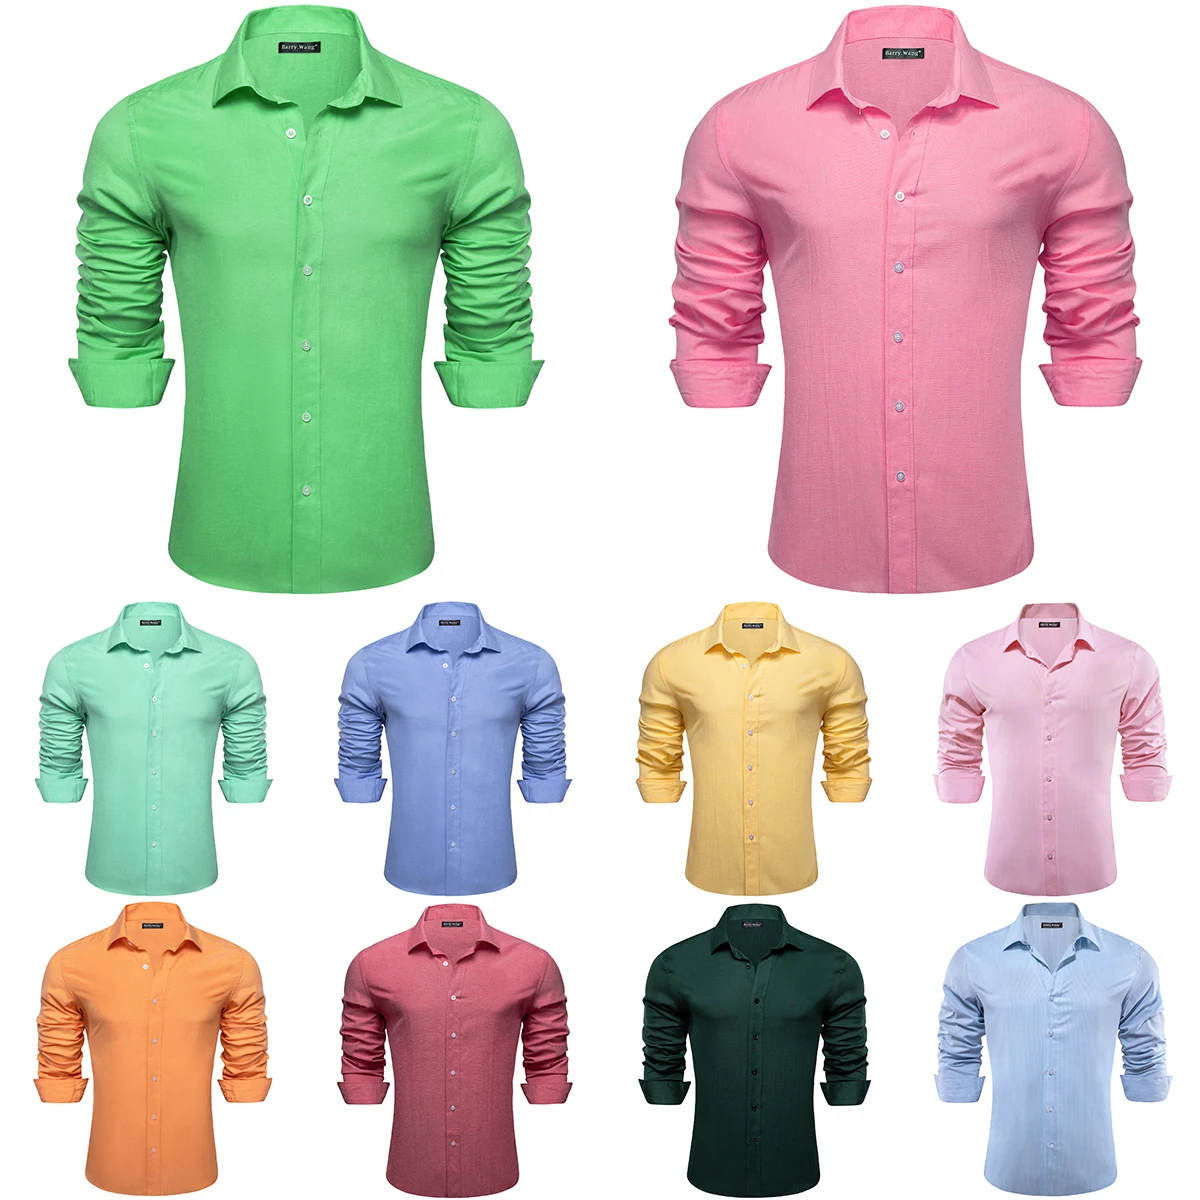 Designer Solid Shirts for Men Long Sleeve Blue Green Pink Black Yellow Cotton Polyester Male Blouses Slim Fit Tops Barry Wang